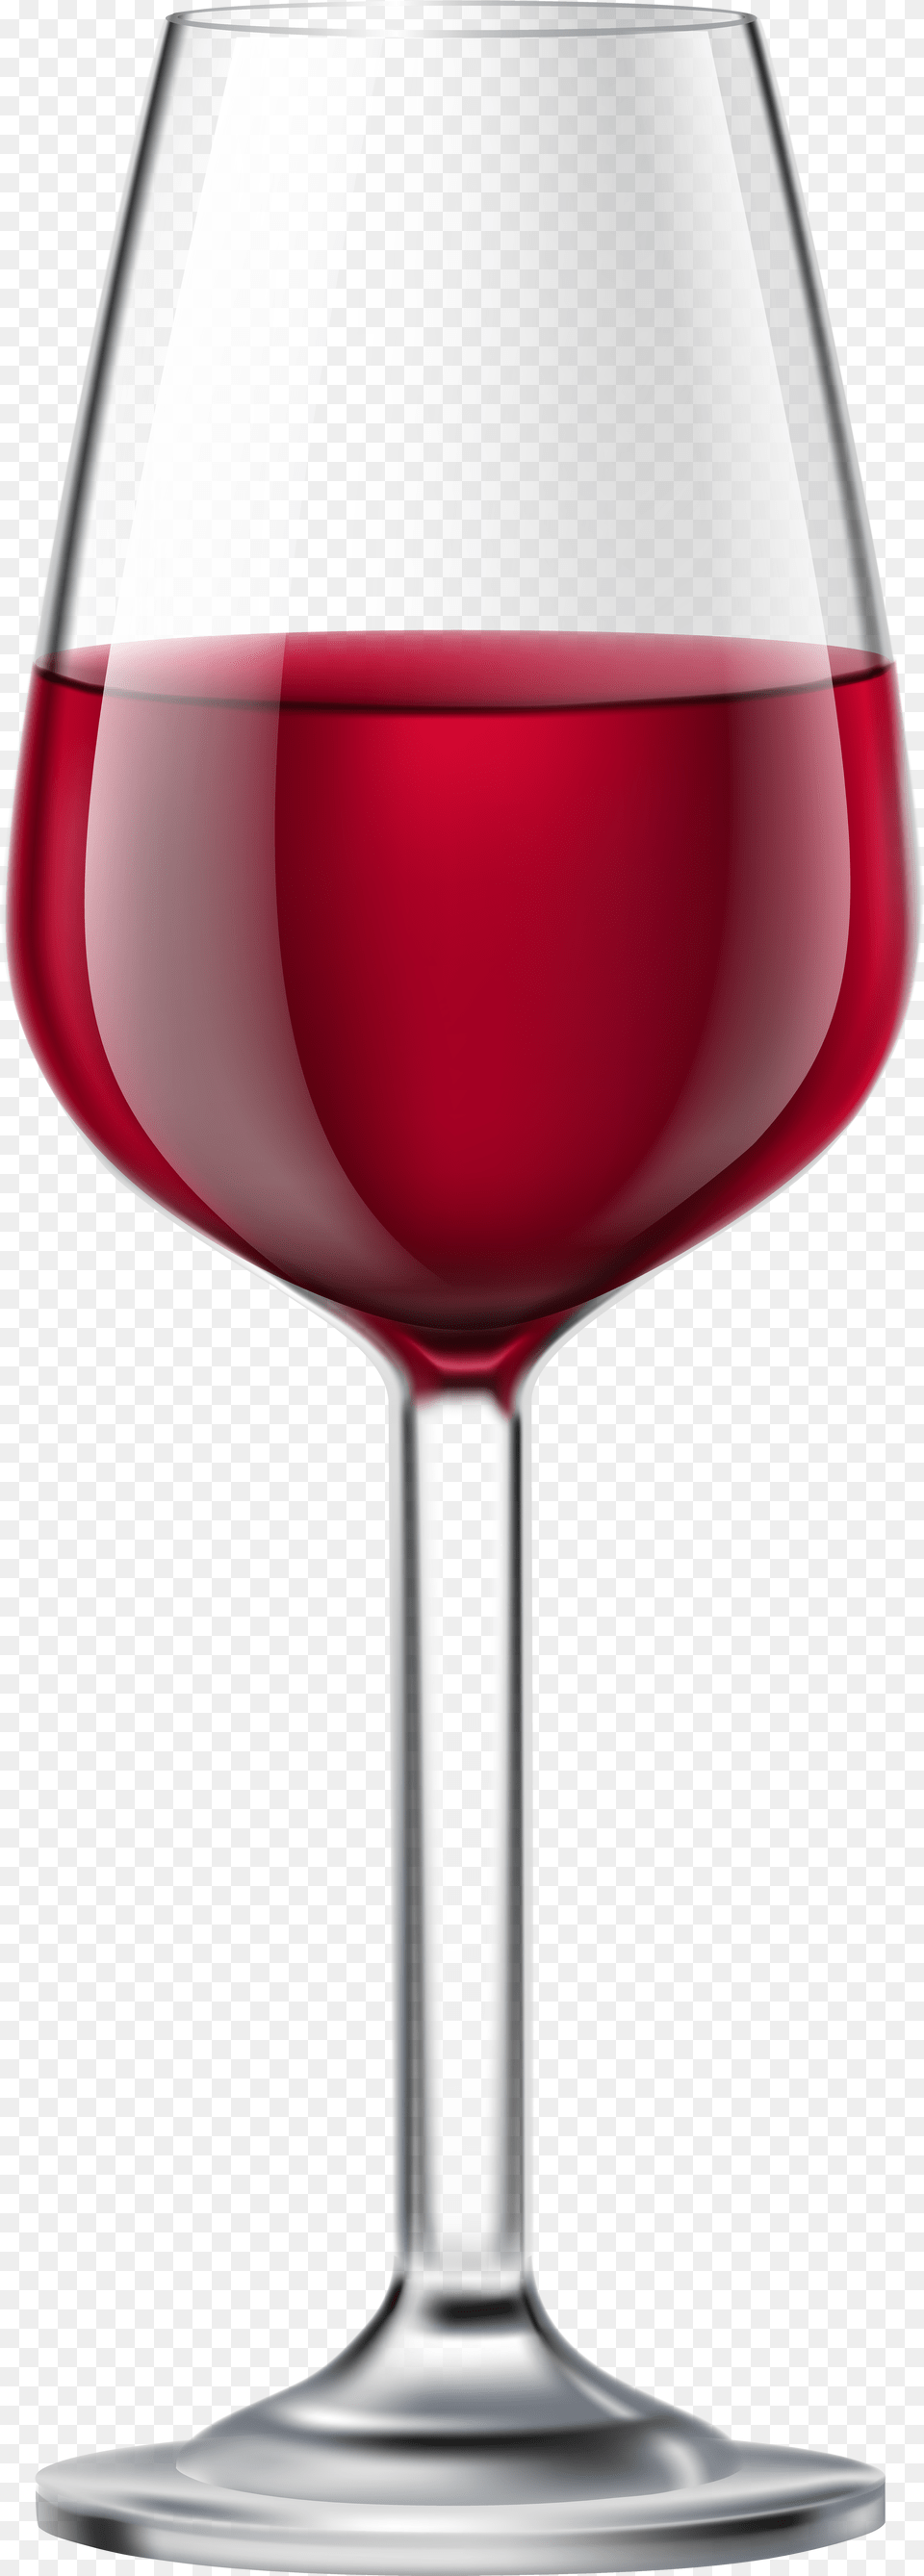 Wine Glass Clipart Stylized Transparent Background Red Wine In Glass Free Png Download